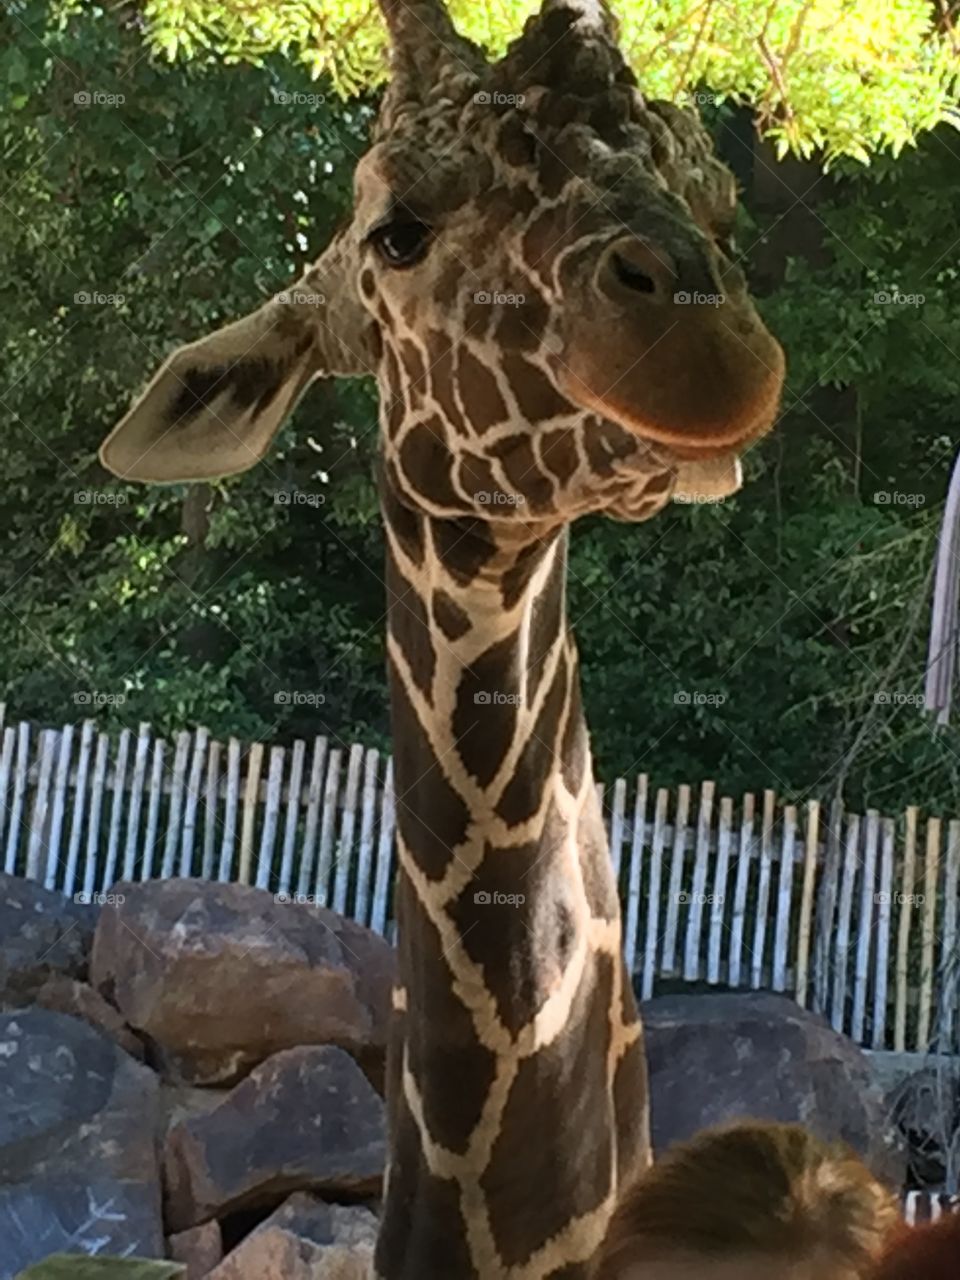 Snapped this photo during the giraffe feeding time at the Atlanta Zoo